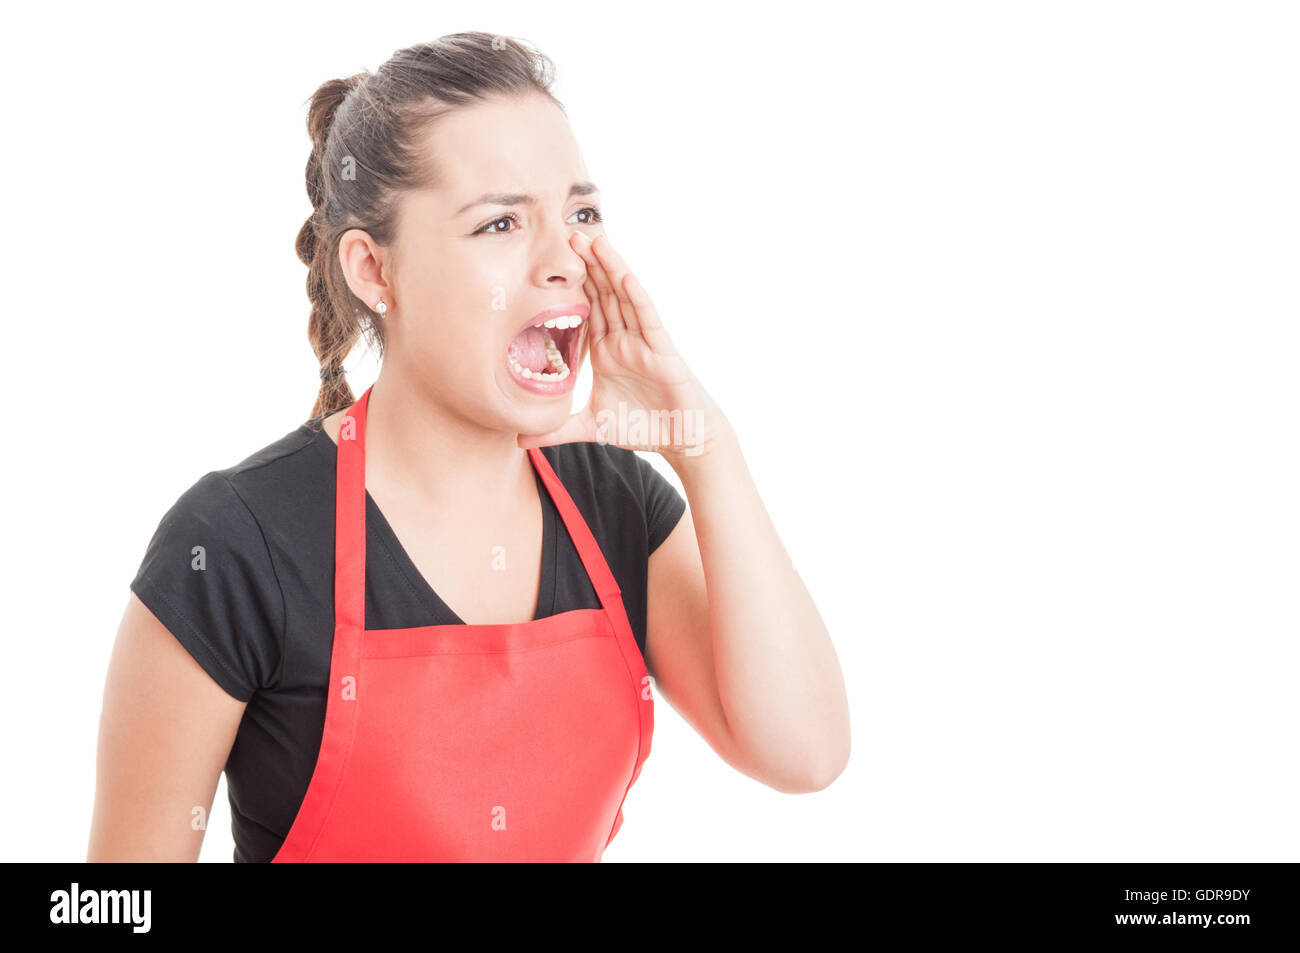 Female employee on supermarket shouting out loud at somebody isolated on white background with copy space Stock Photo